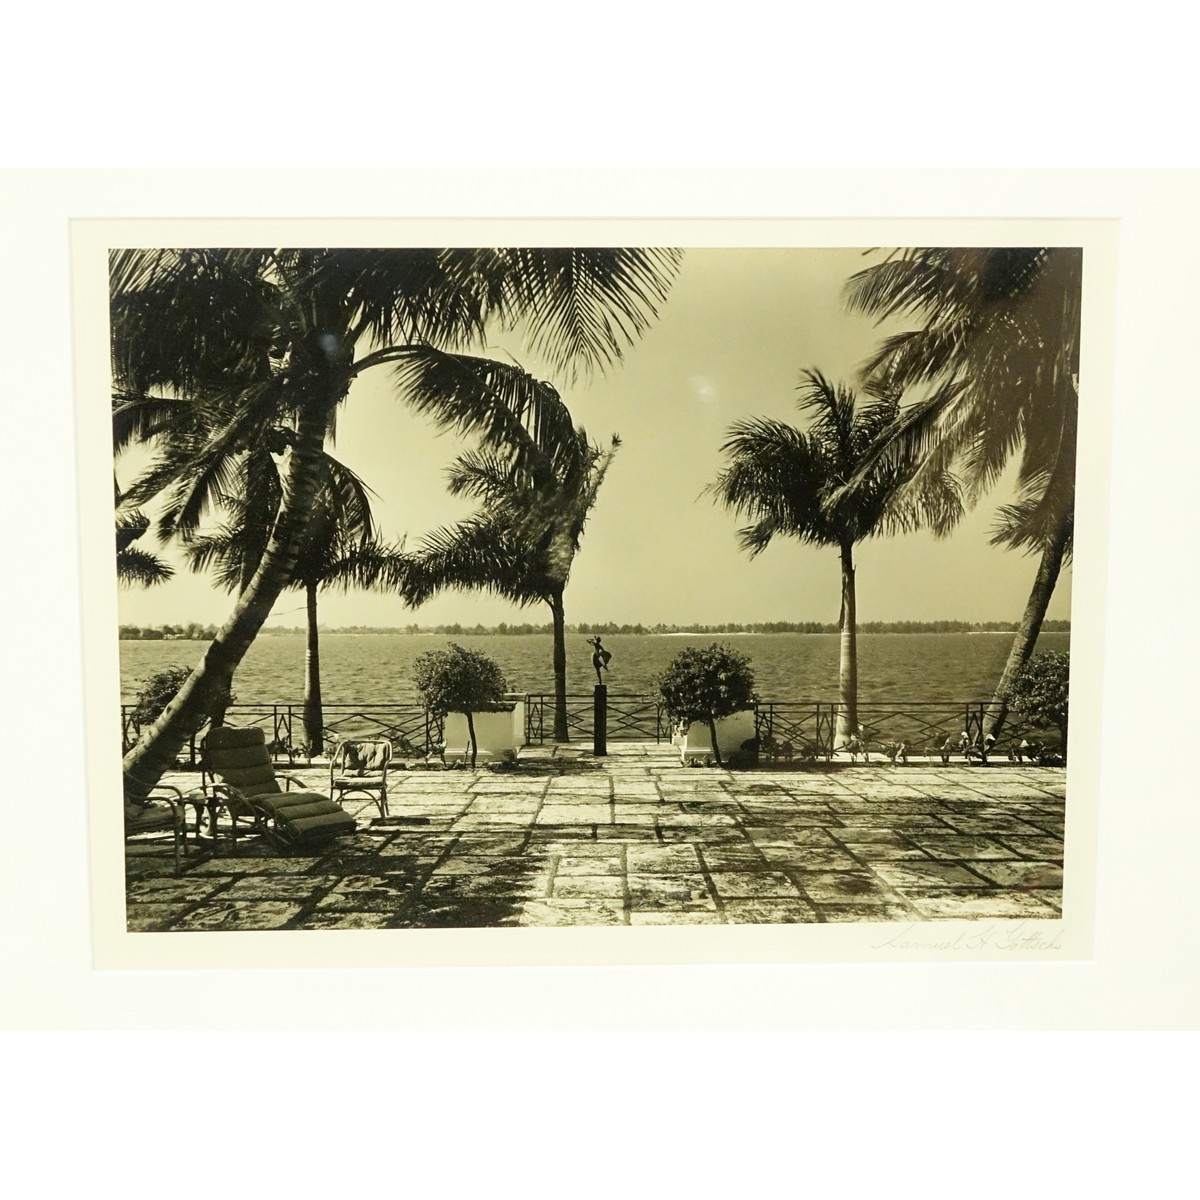 Two (2) Works by Samuel Gottscho, American (1875 - 1971) Black and White Silver Gelatin Prints of Two Outdoor Scenes, Each Signed Lower Right. Good condition.